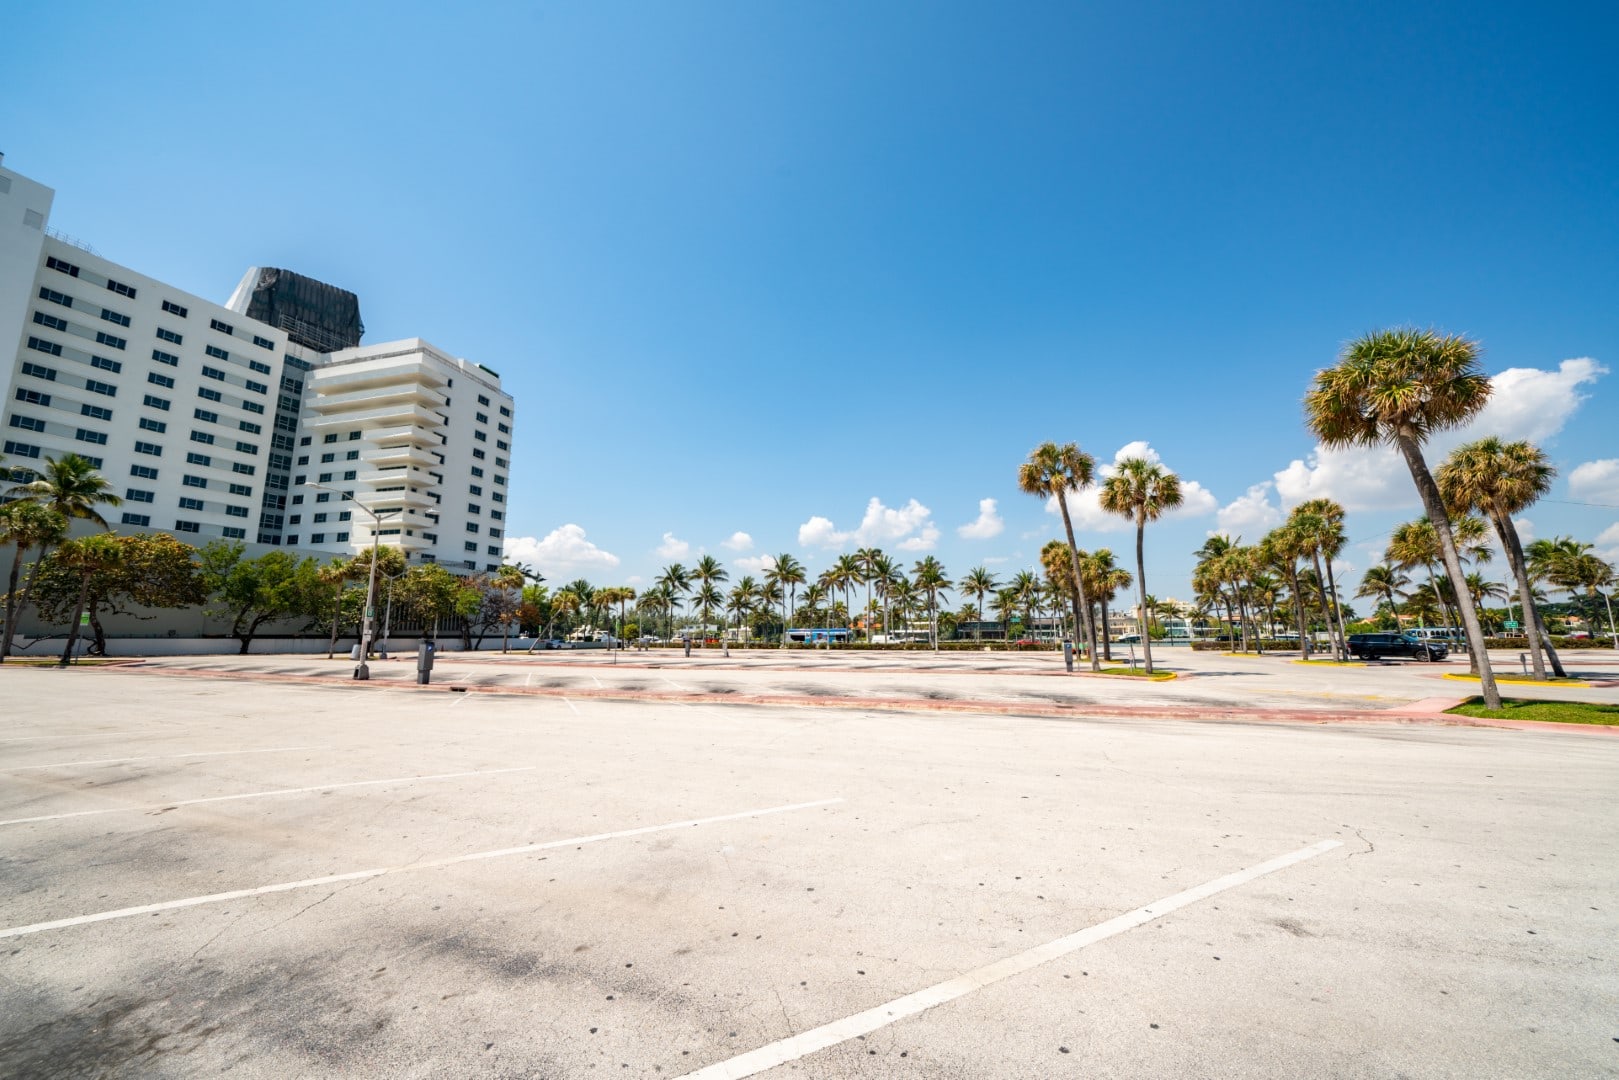 Miami Beach closed and parking lots empty to slow spread of Coronavirus Covid 19 pandemic